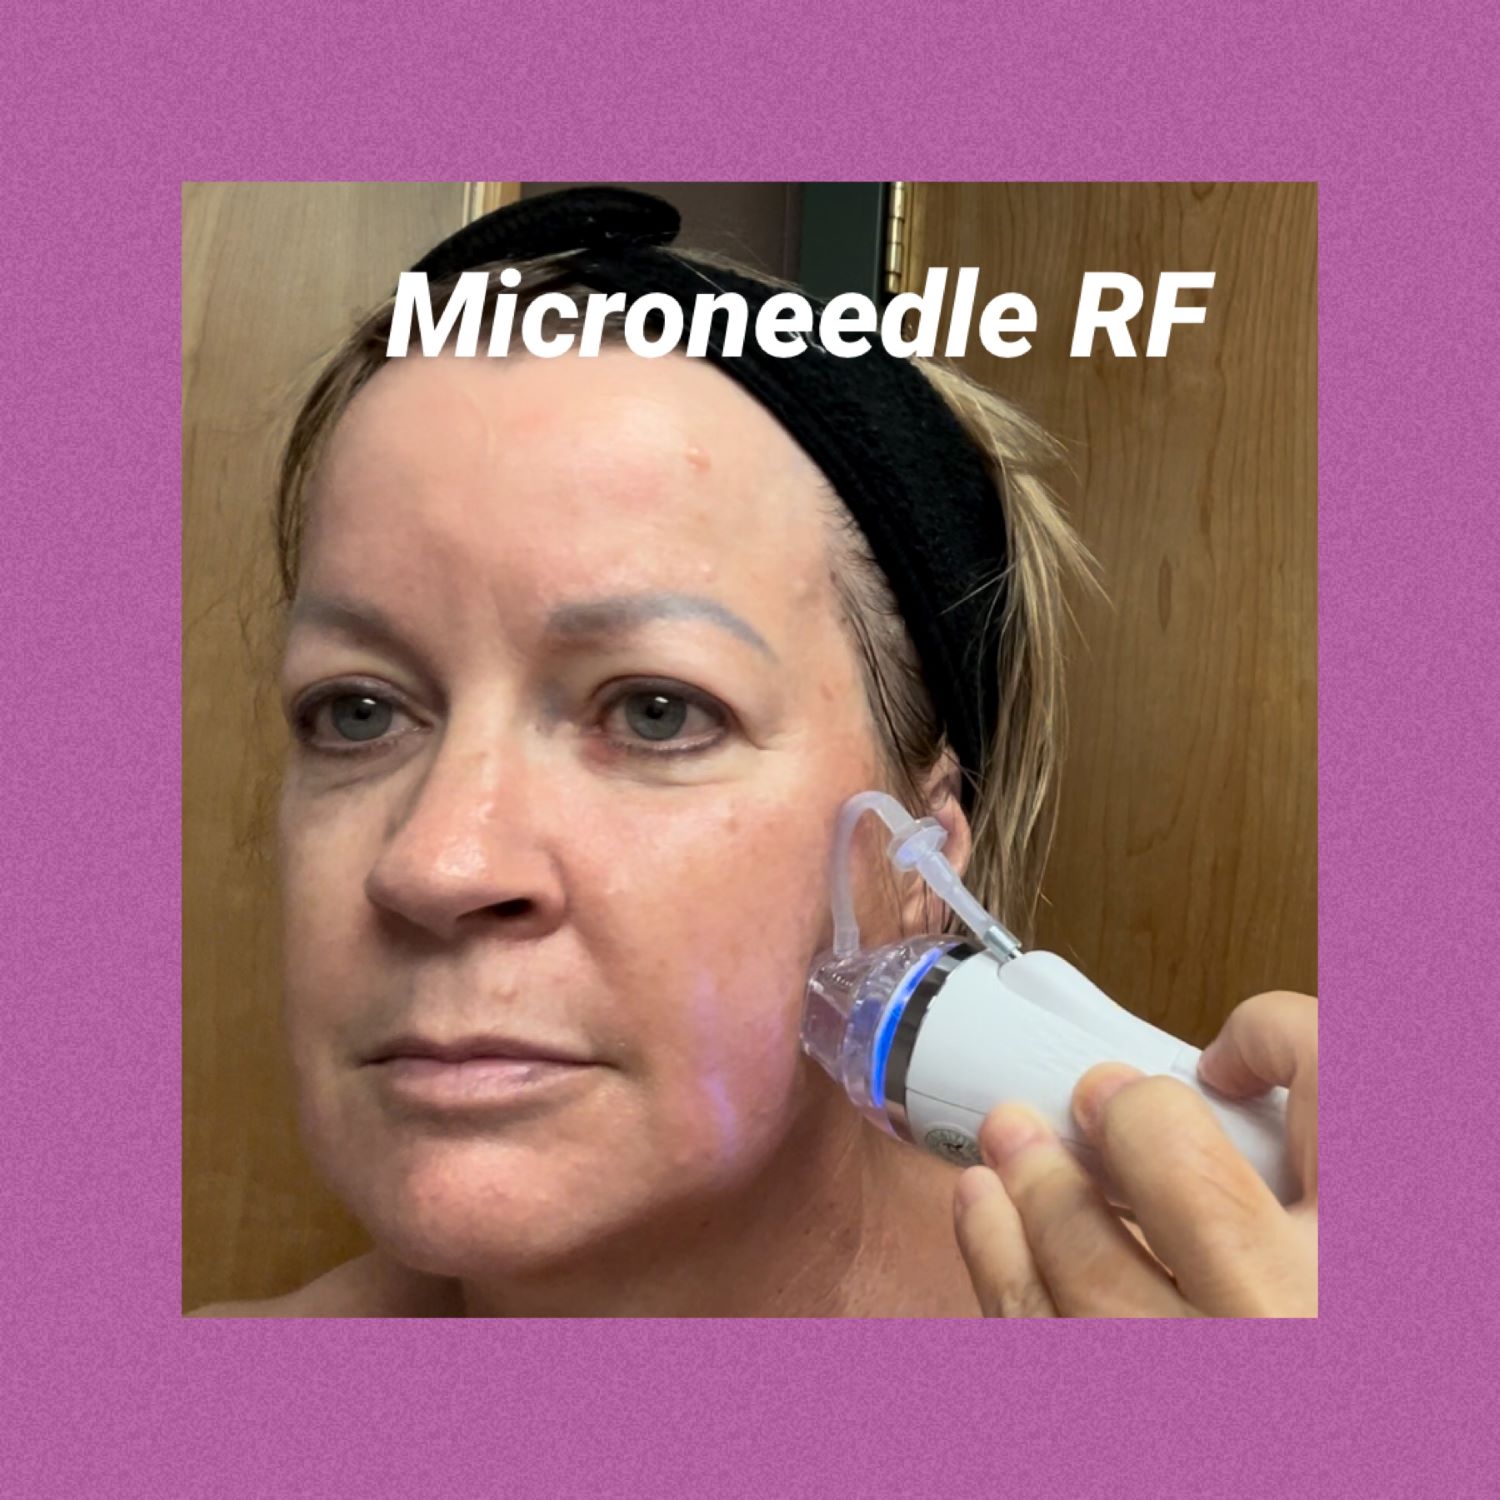 Microneedling with Radio Frequency